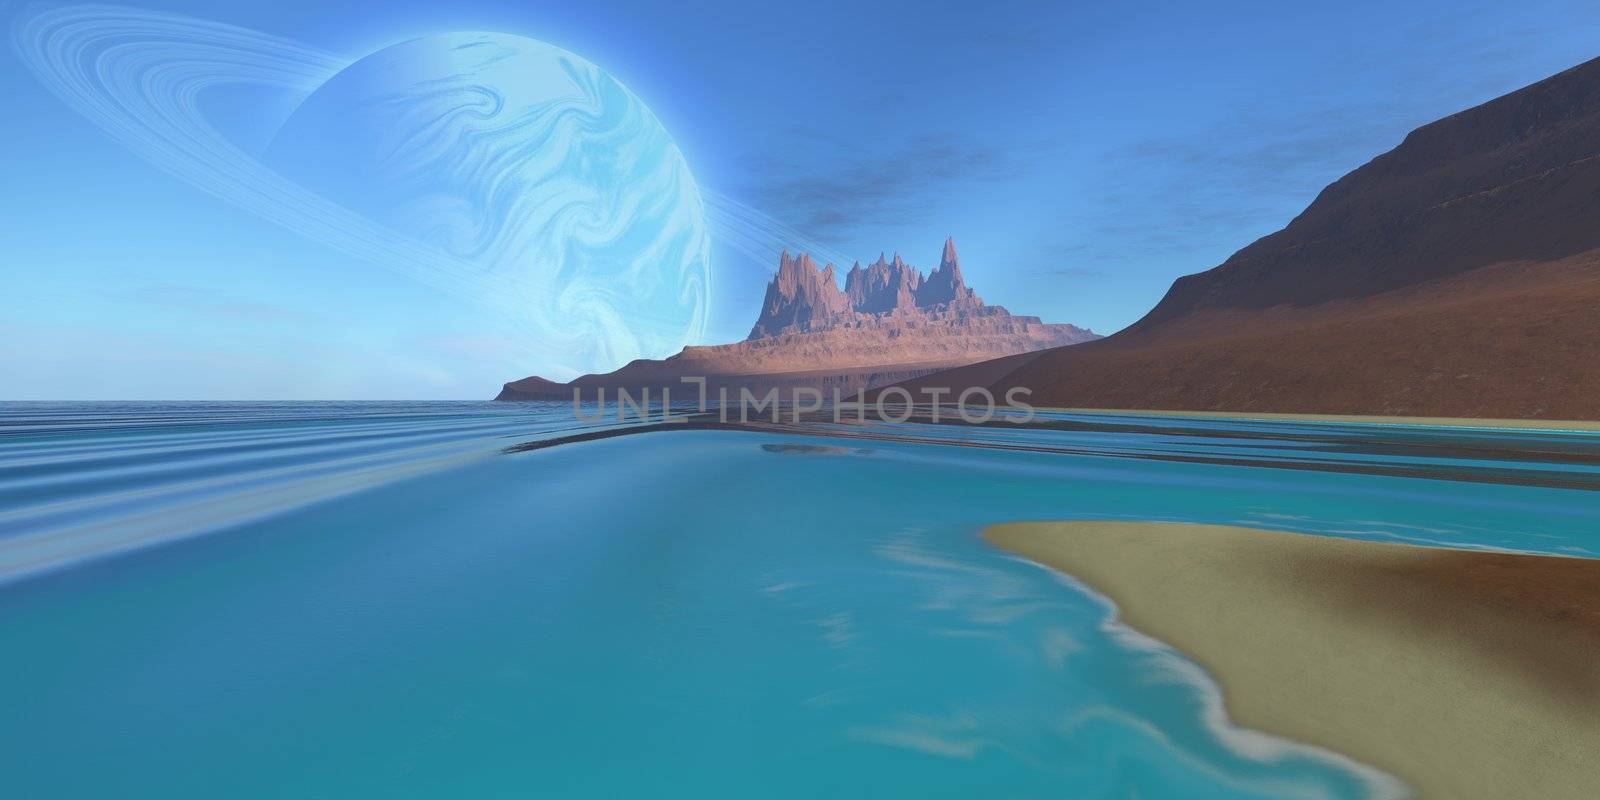 Cosmic seascape on another planet.